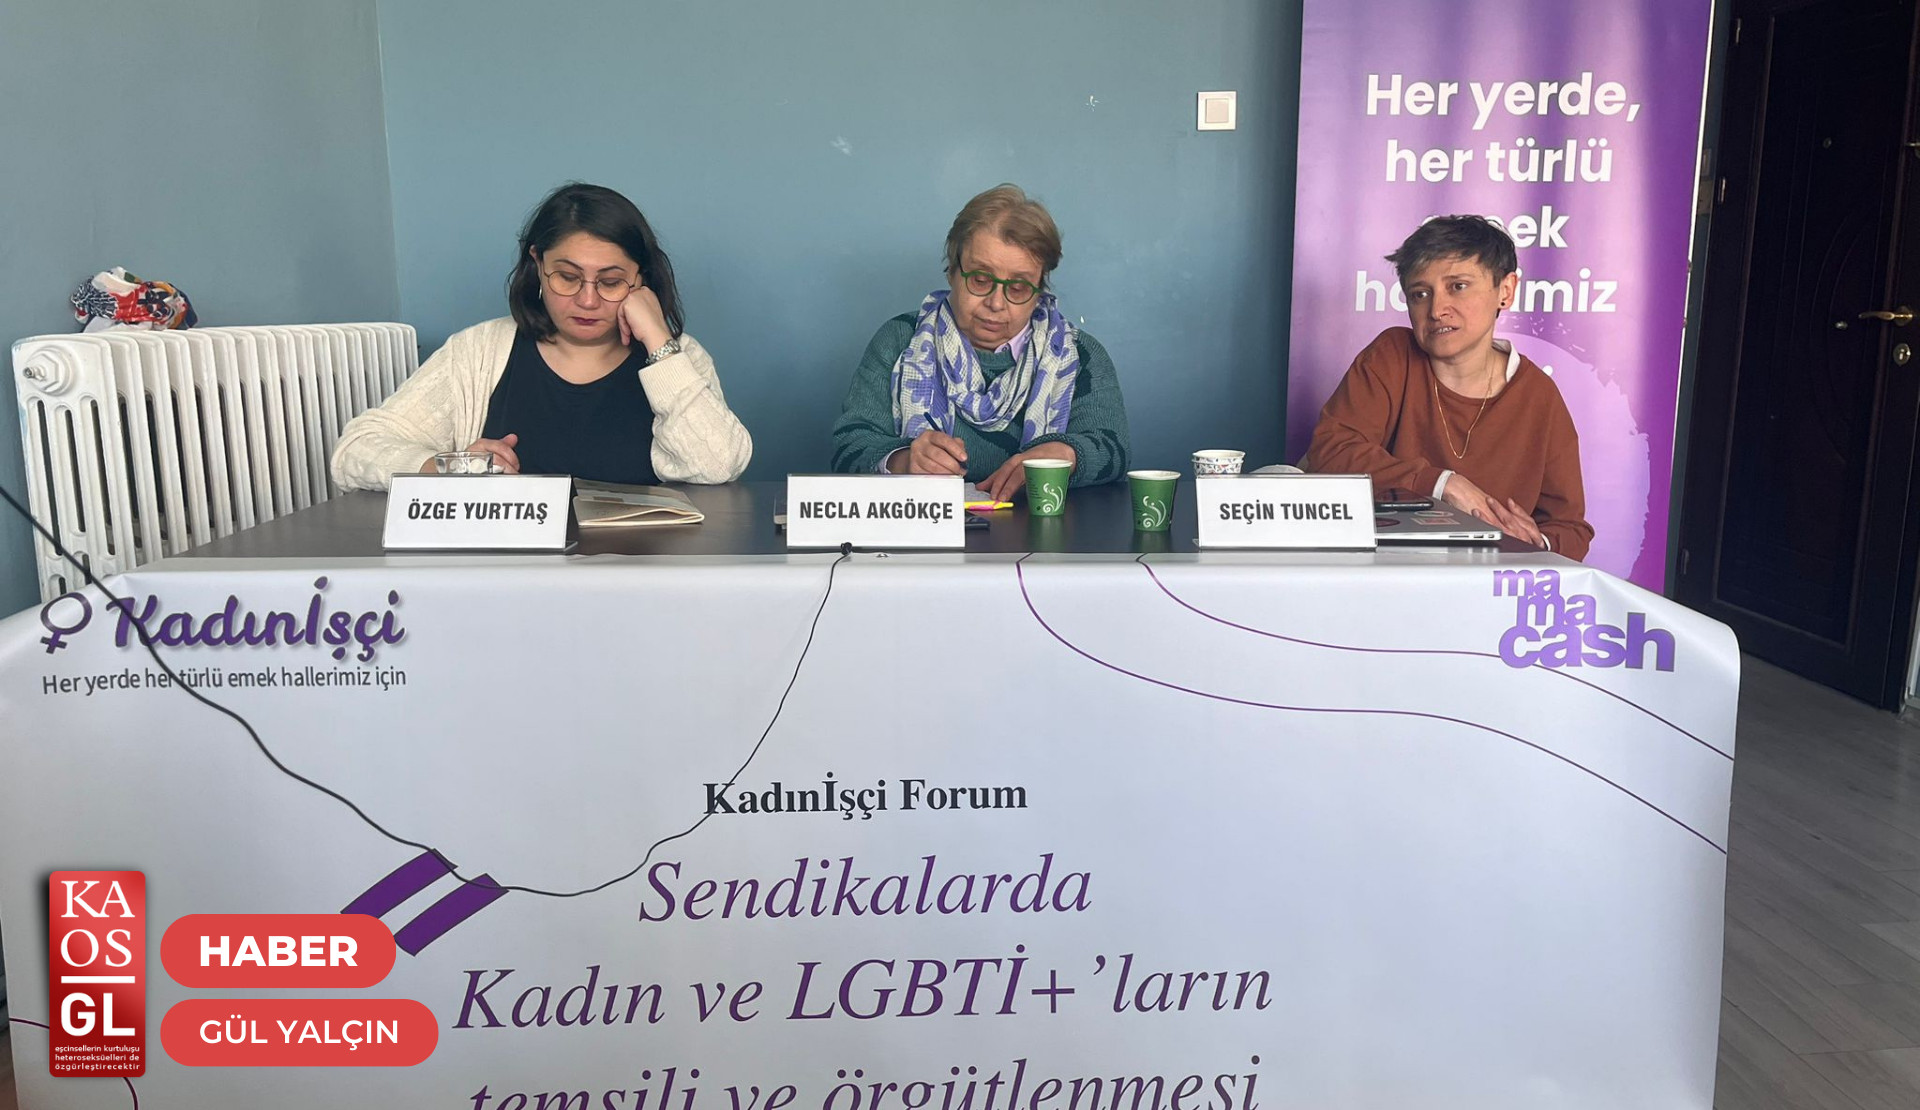 “Forum on Representation and Organization of Women and LGBTI+ in Trade Unions” was held | Kaos GL - News Portal for LGBTI+